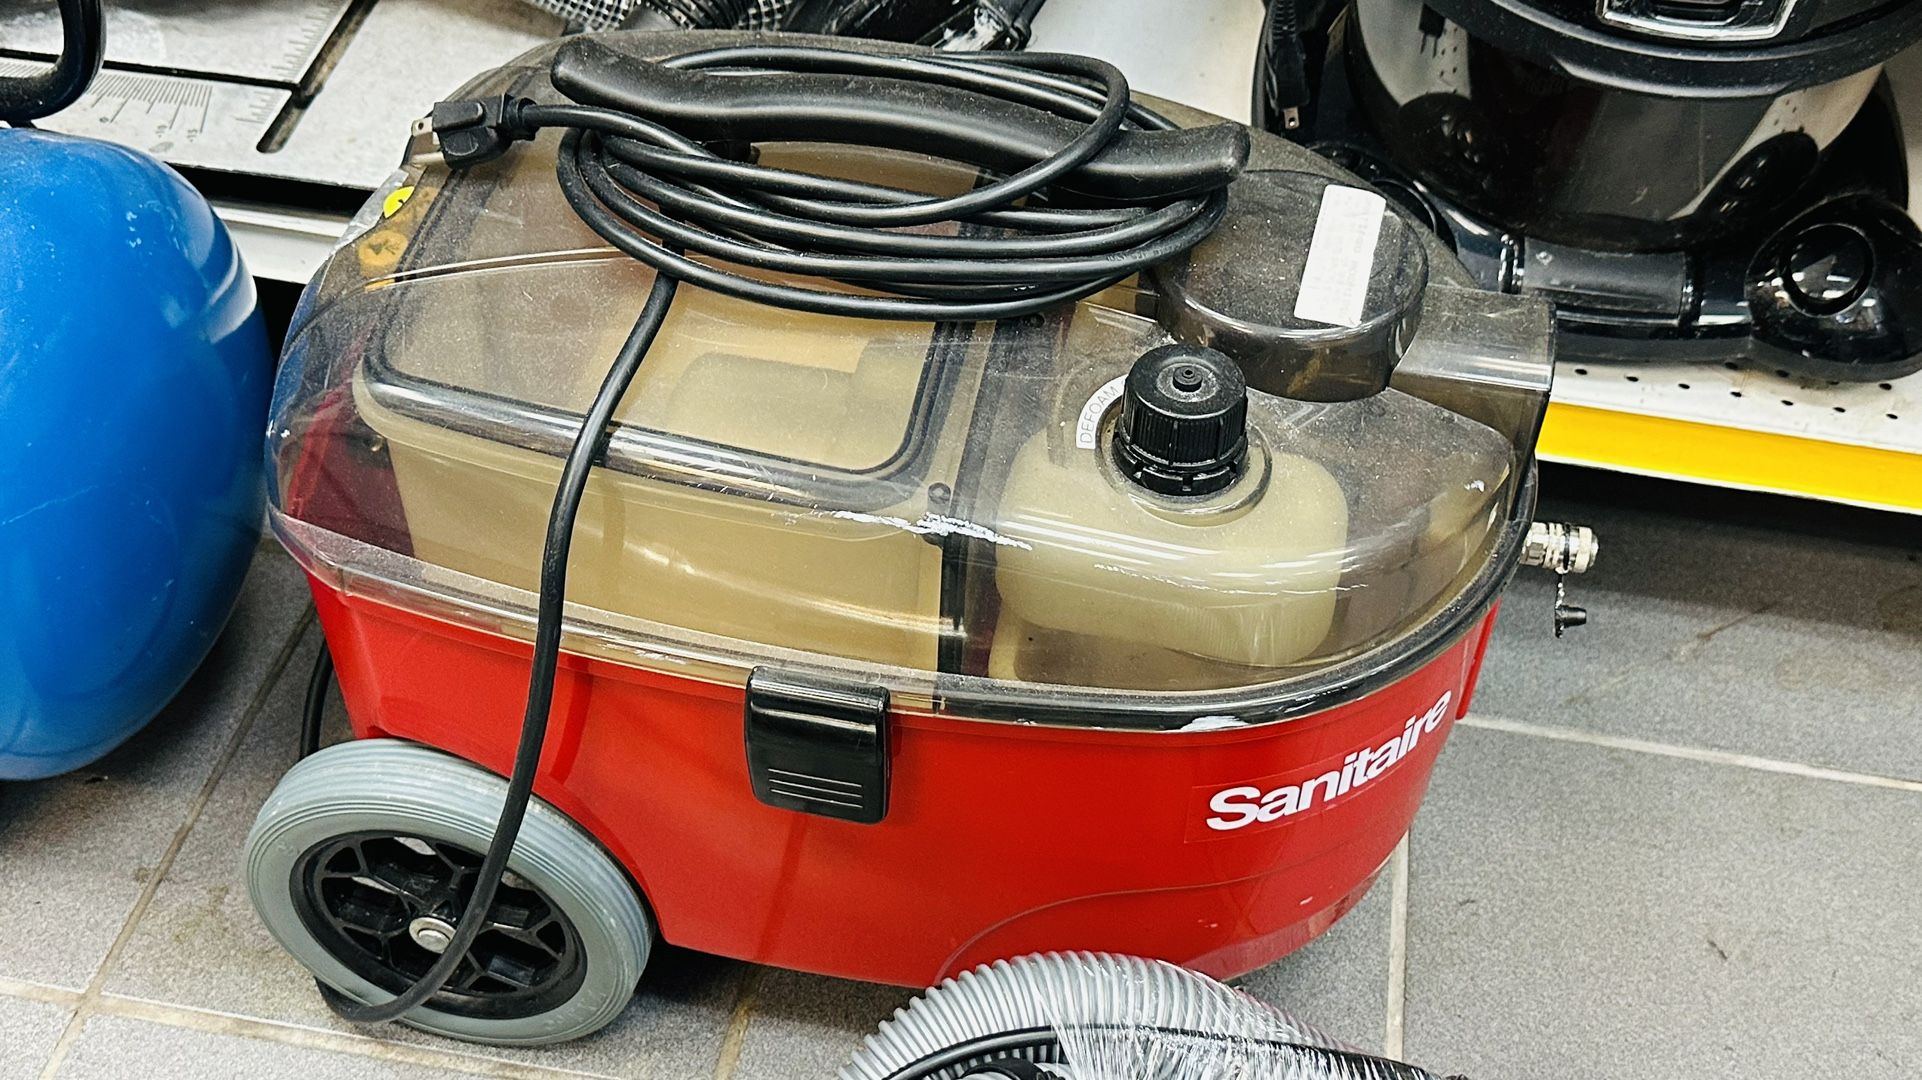 Sanitaire SC6075A Portable Carpet Spot Cleaner Extractor rofessionall! includes wand! - great for car detailing!